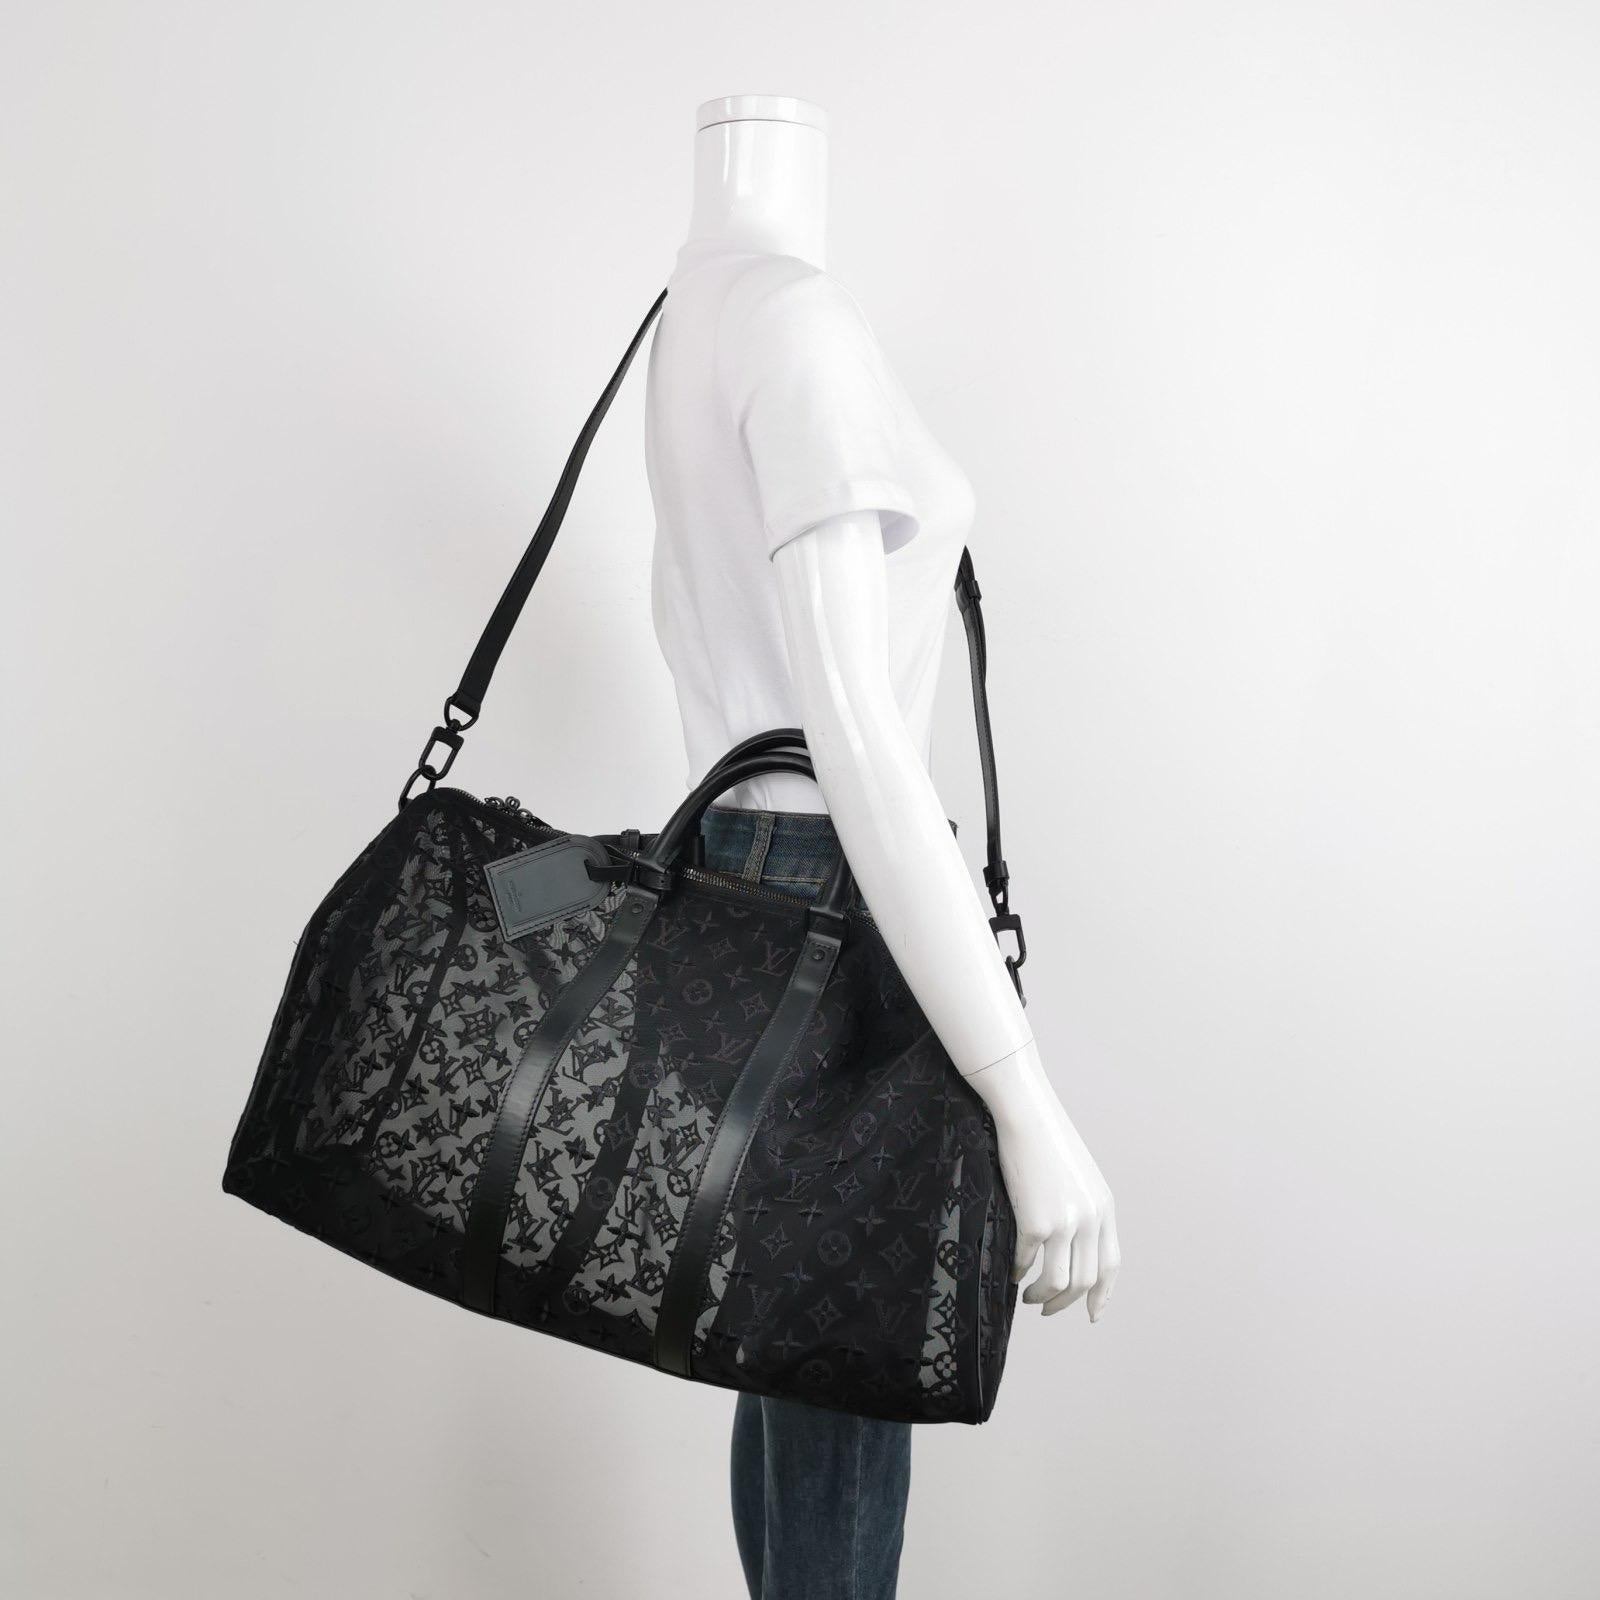 This Louis Vuitton Keepall Bandouliere Monogram Mesh 50 Black duffle bag in Mesh / Leather with transparent mesh monogram is the coveted piece of limited collection by acclaimed artistic director of menswear Virgil Abloh.

This mesh bag features